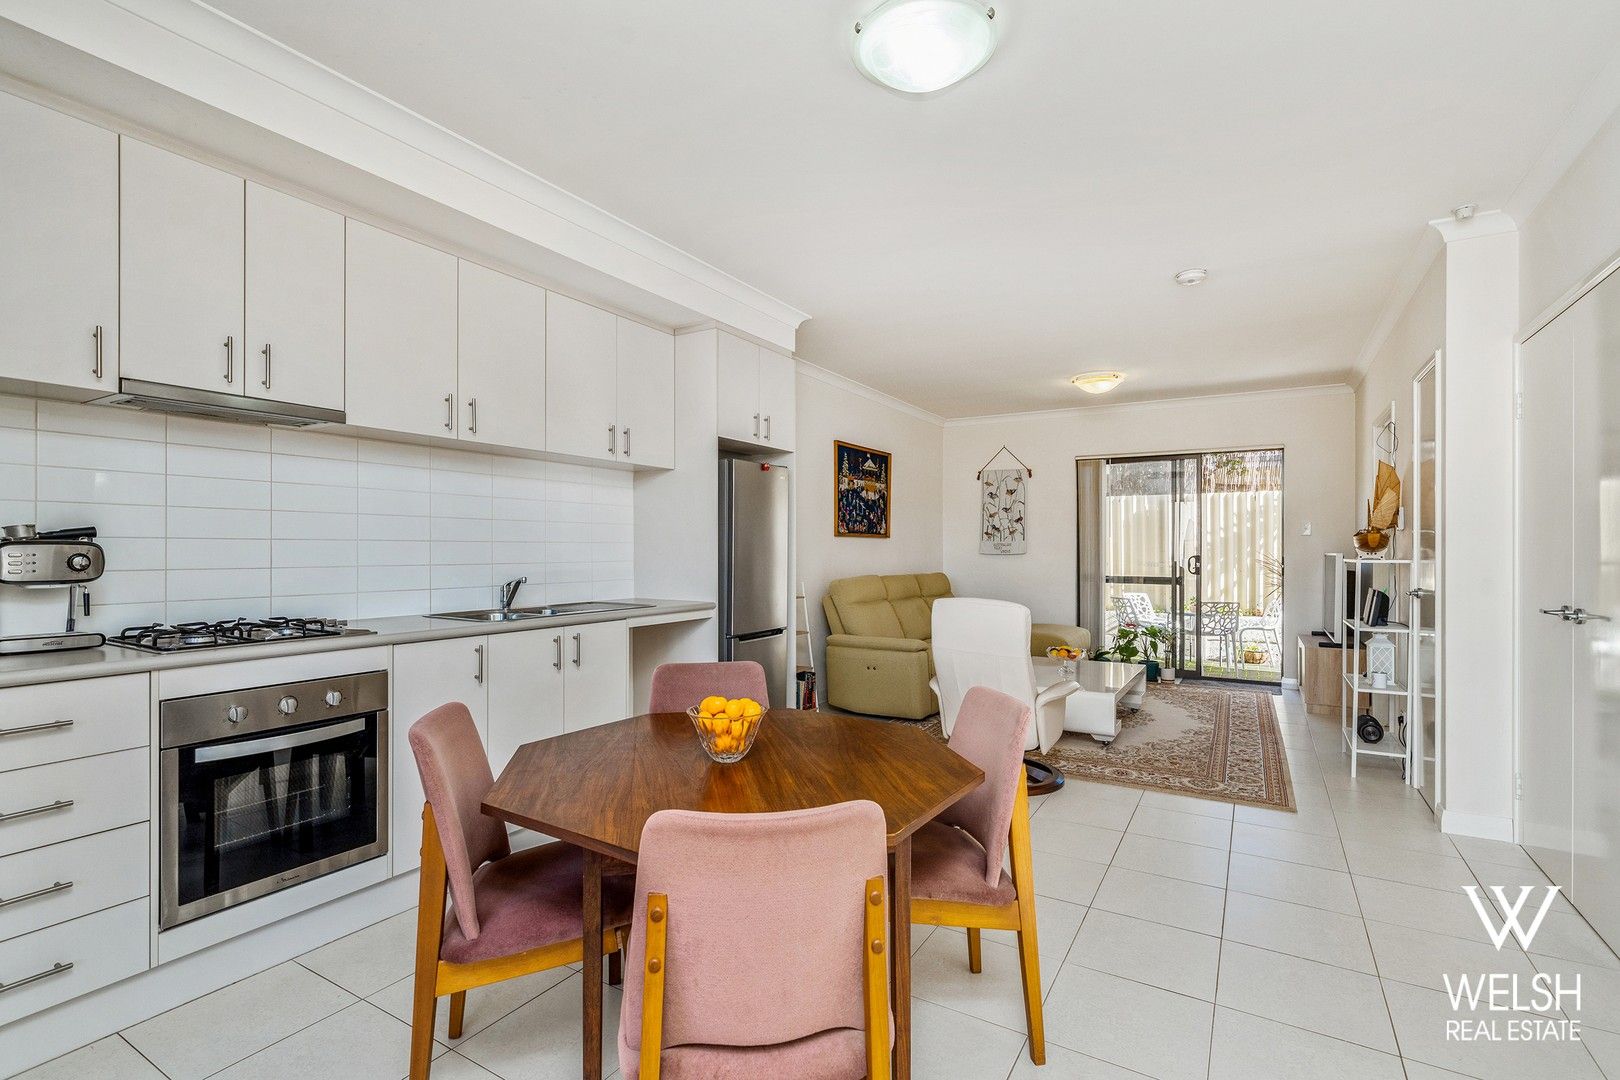 2 bedrooms Apartment / Unit / Flat in 7/86 Moreing Street REDCLIFFE WA, 6104